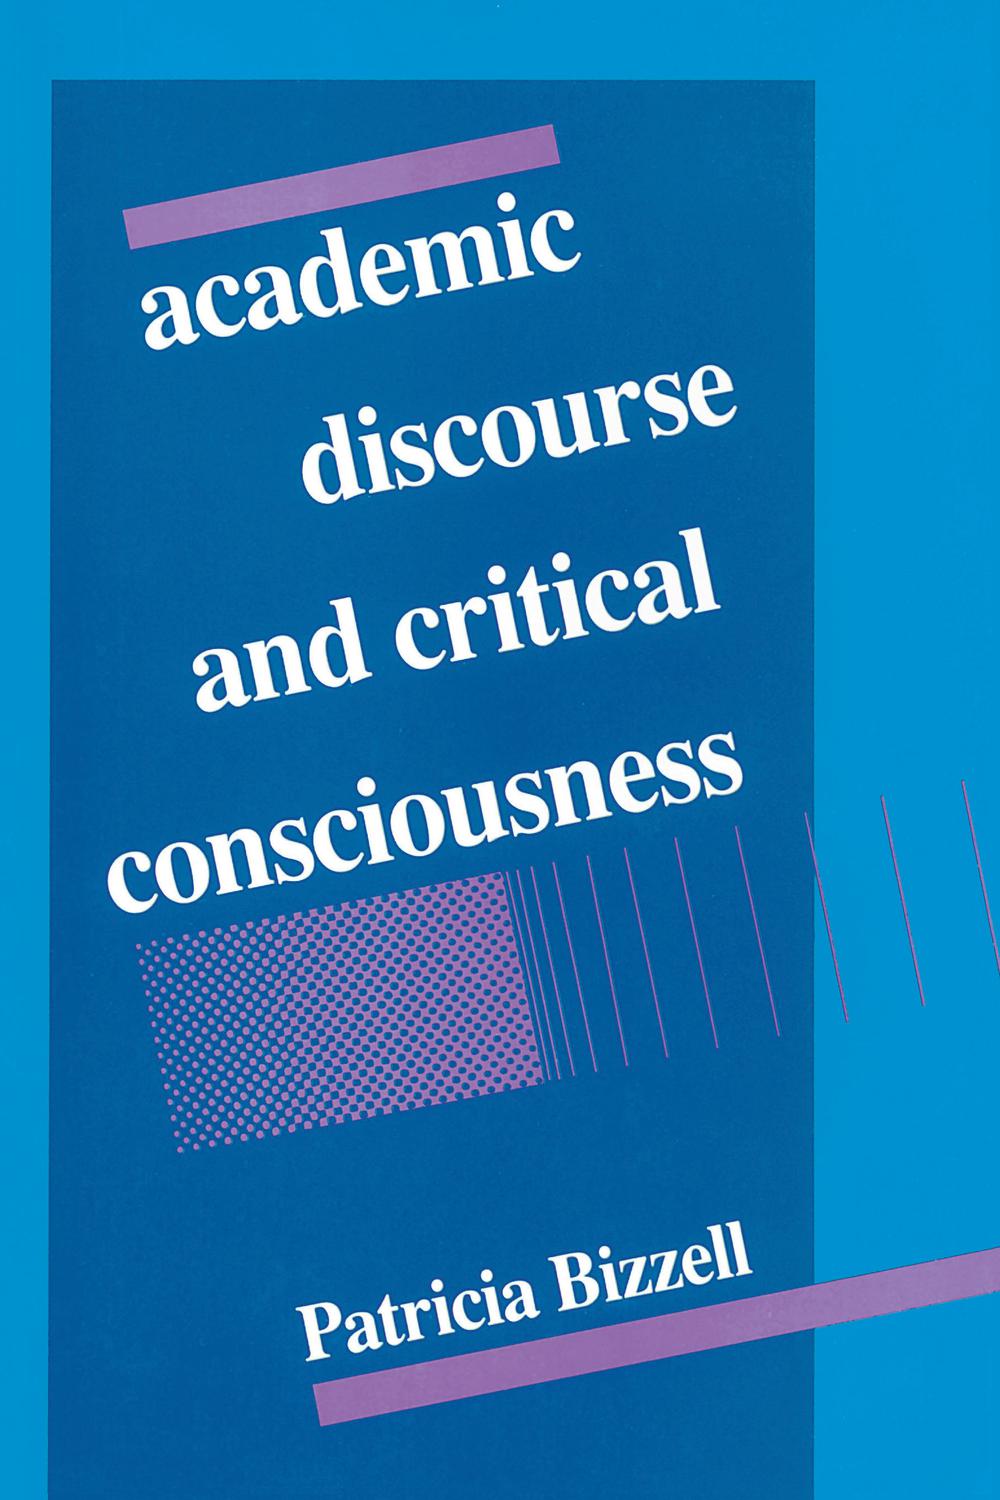 Academic Discourse and Critical Consciousness - Patricia Bizzell